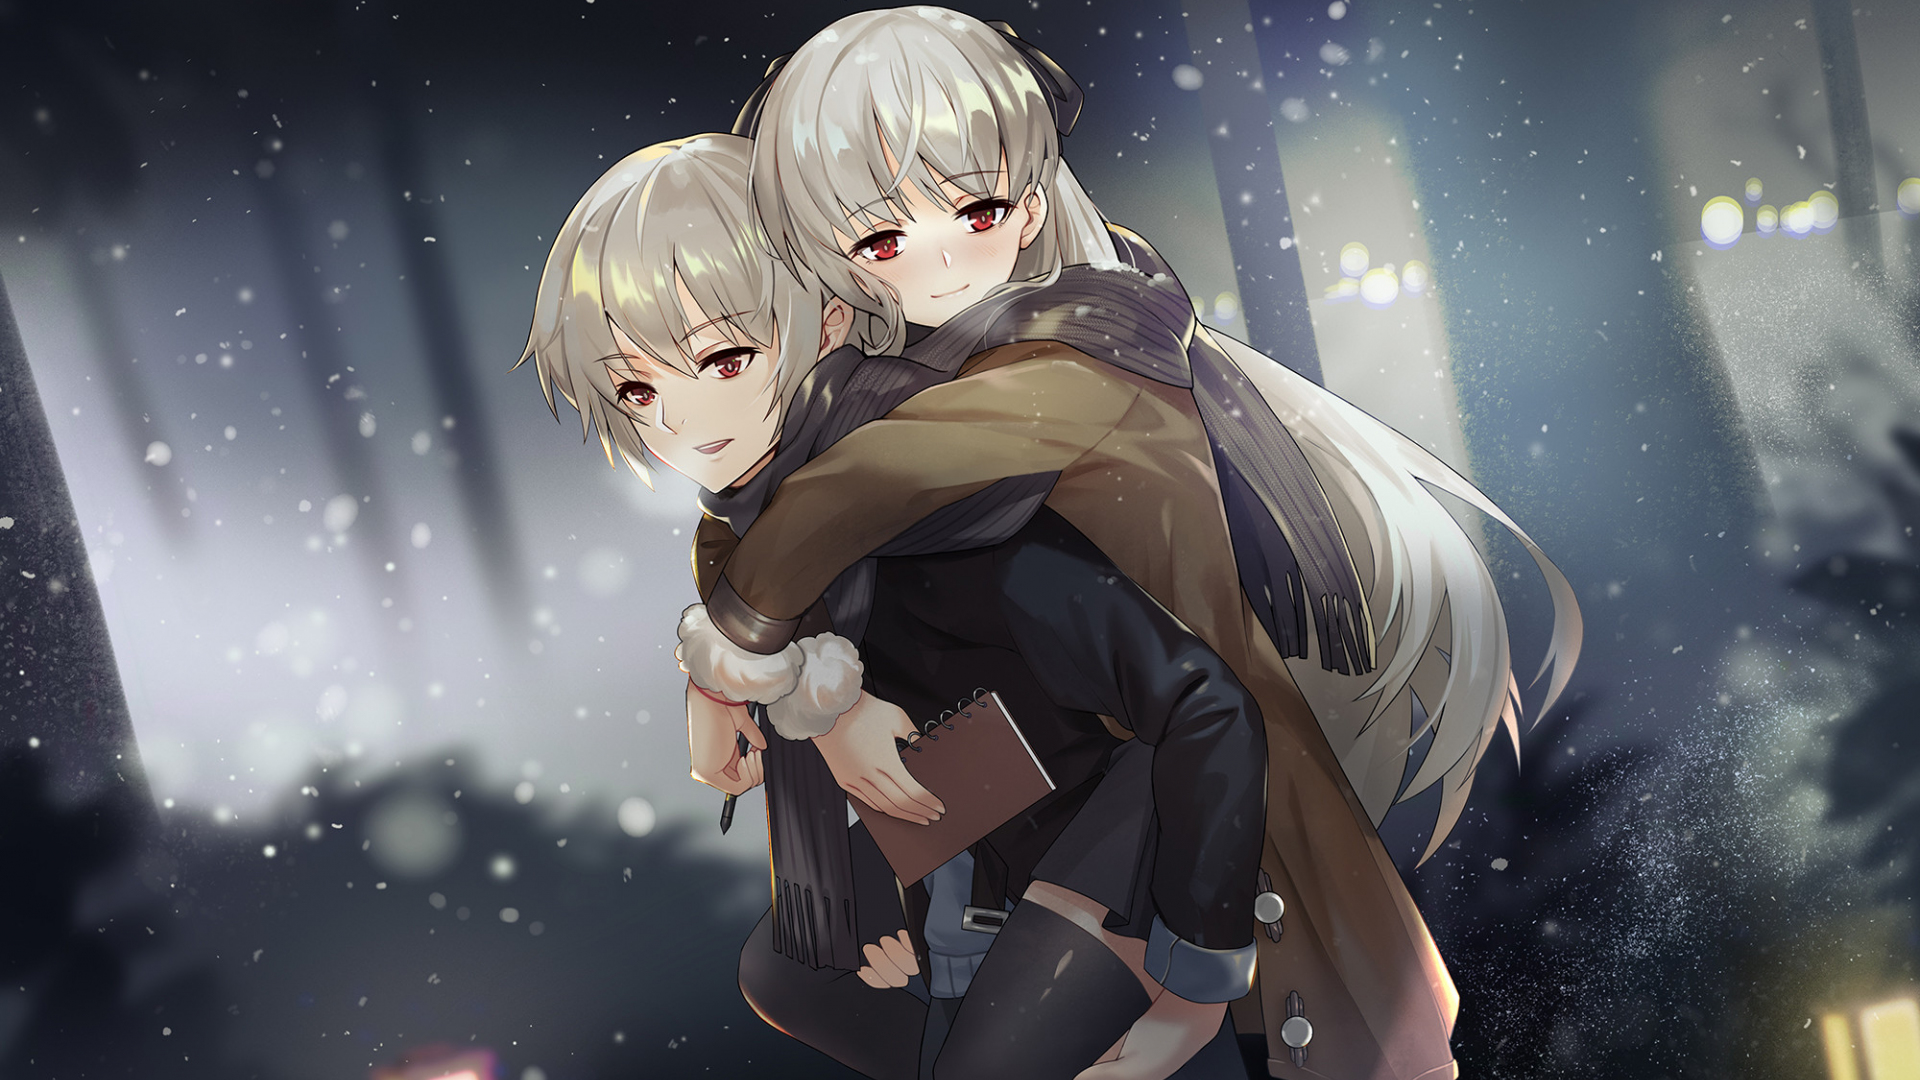 Desktop Wallpaper Anime Couple Friends Anime Girl And Boy Fun Hd Image Picture Background 7a5946